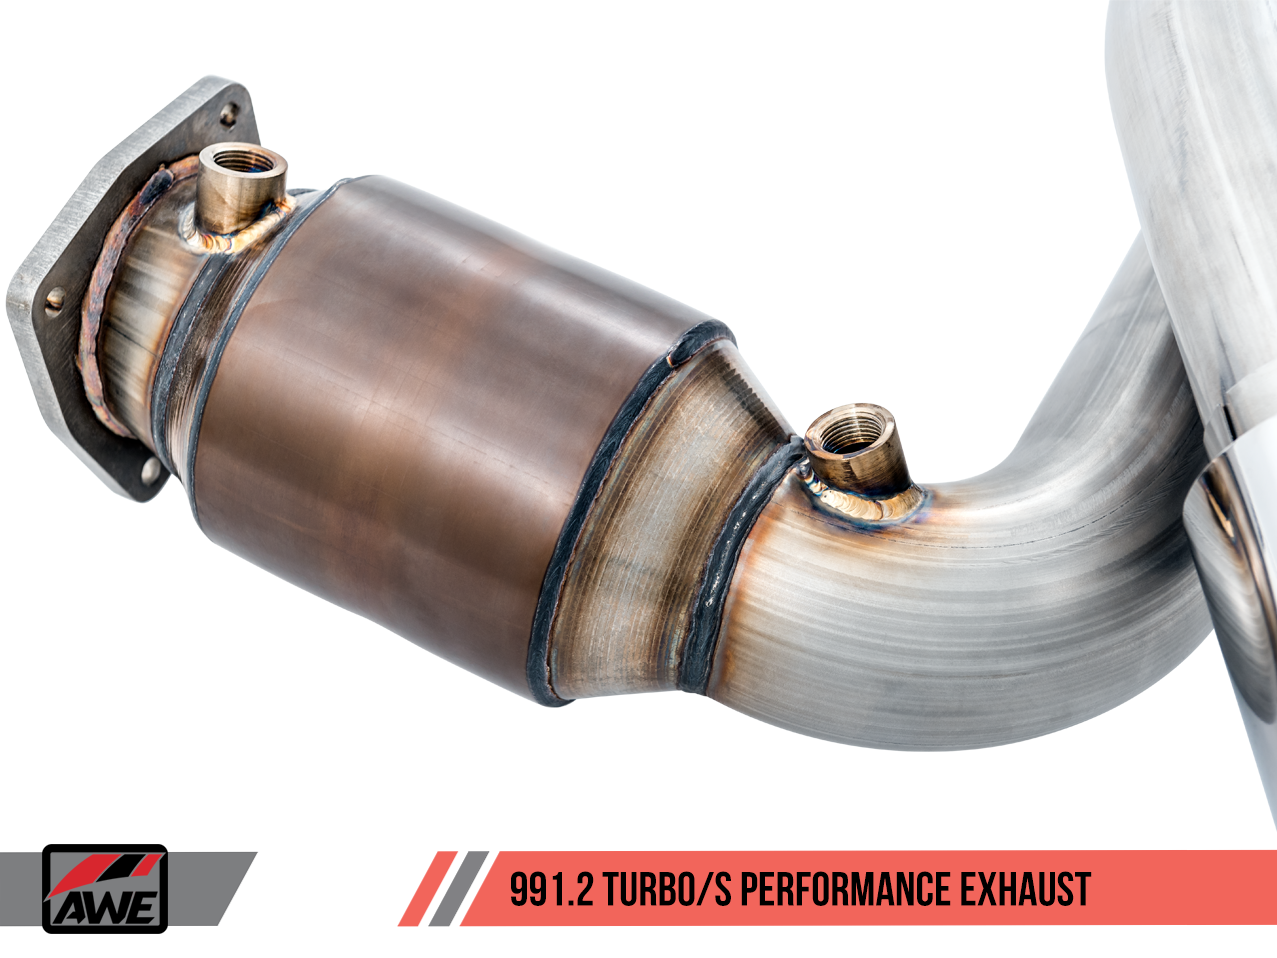 AWE Performance Exhaust and High-Flow Cat Sections for Porsche 991.2 Turbo - With Chrome Silver Quad Tips